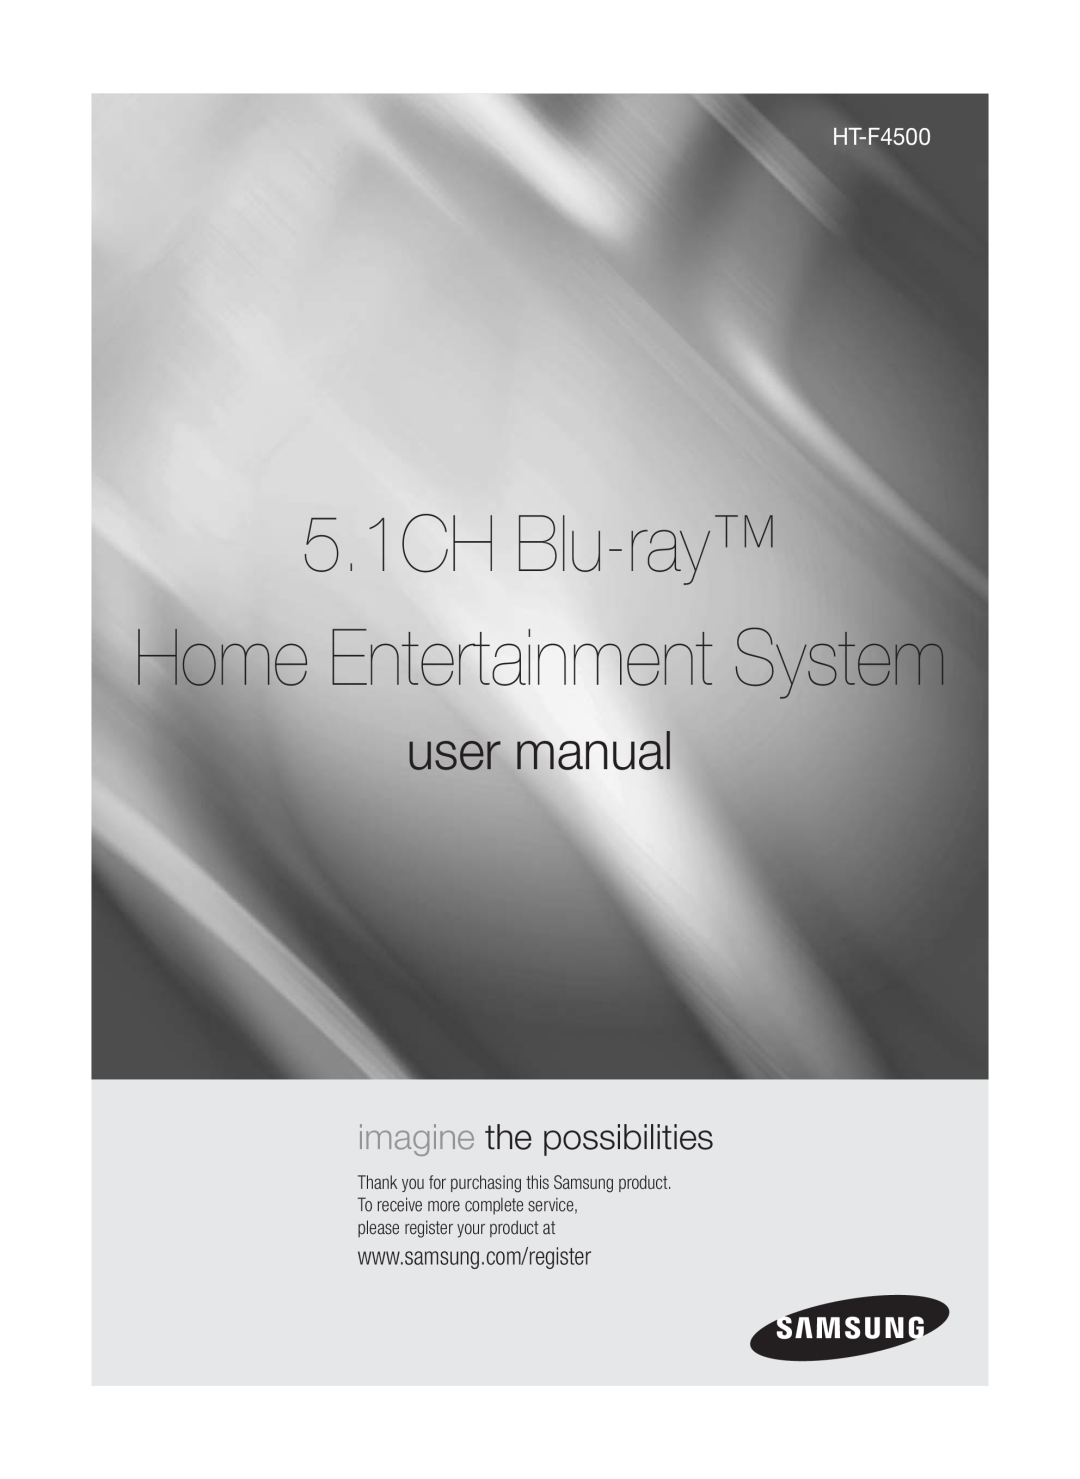 Samsung HTF4500ZA user manual HT-F4500, 5.1CH Blu-ray, Home Entertainment System, imagine the possibilities 